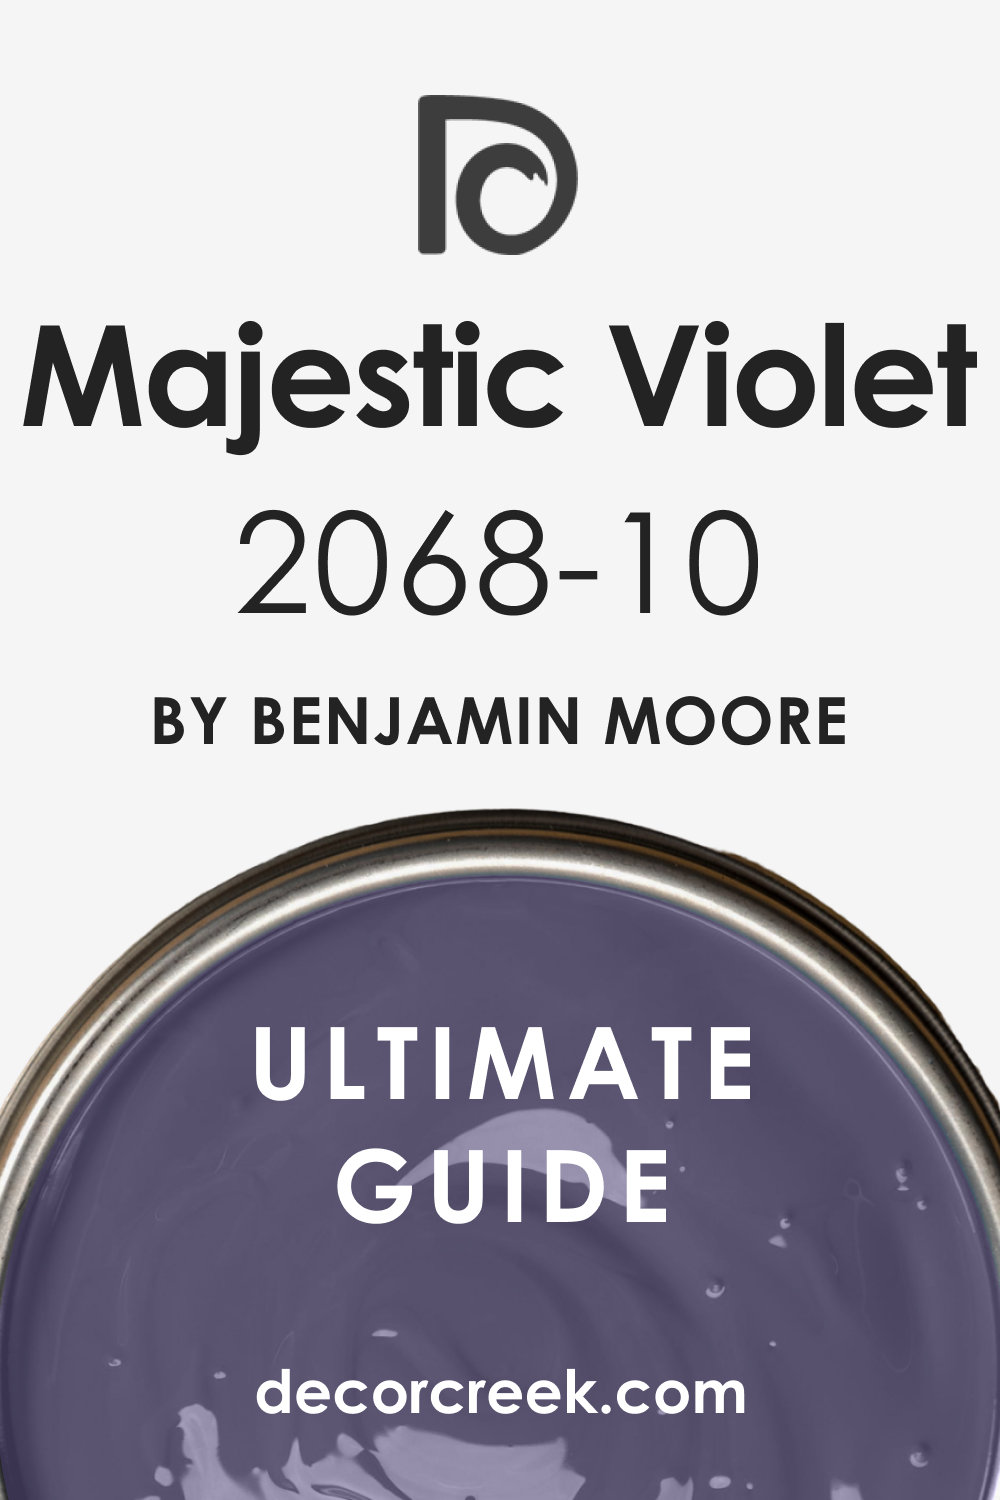 Ultimate Guide of Majestic Violet 2068-10